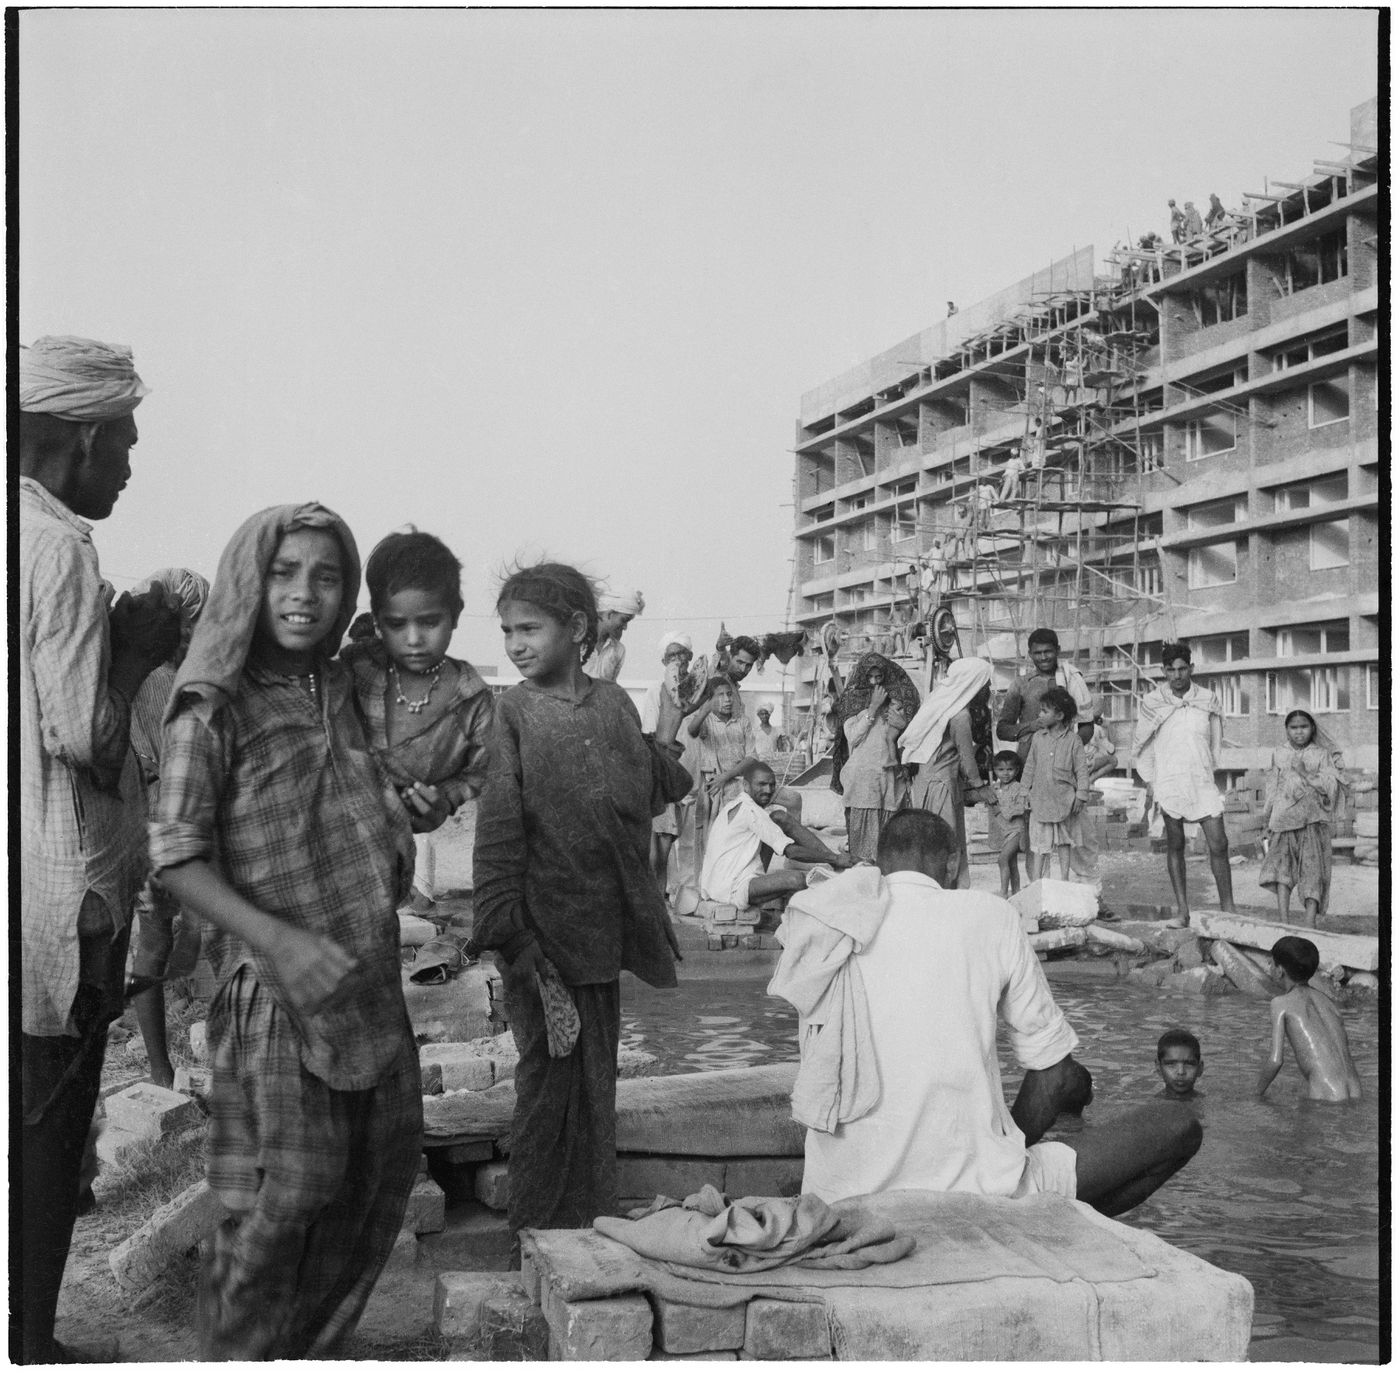 Construction of one of the buildings for the Postgraduate Institute of Medical Education and Research (PGIMER), Sector 12, Chandigarh, India